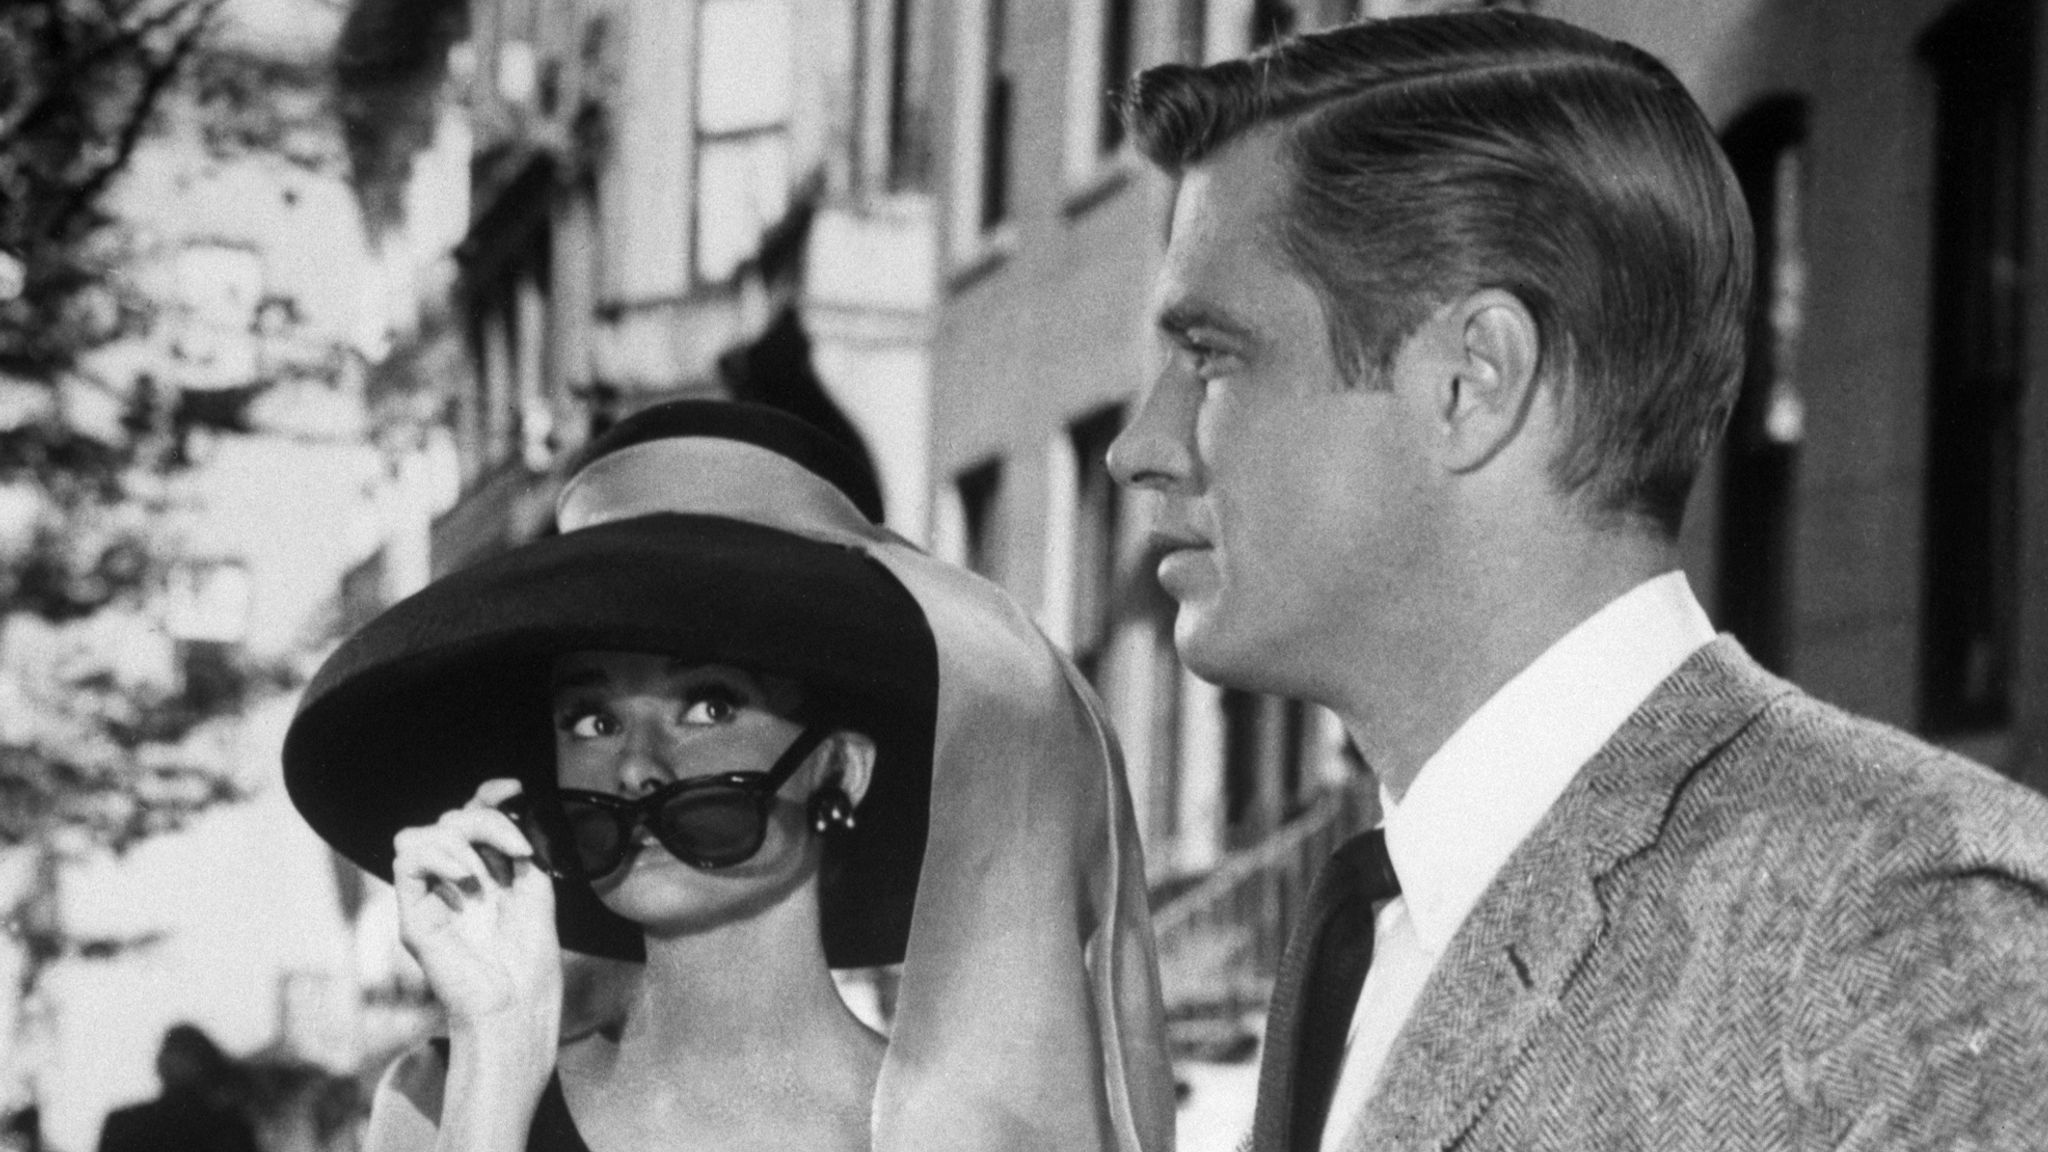 Louis Vuitton owner looks to breakfast on Tiffany's